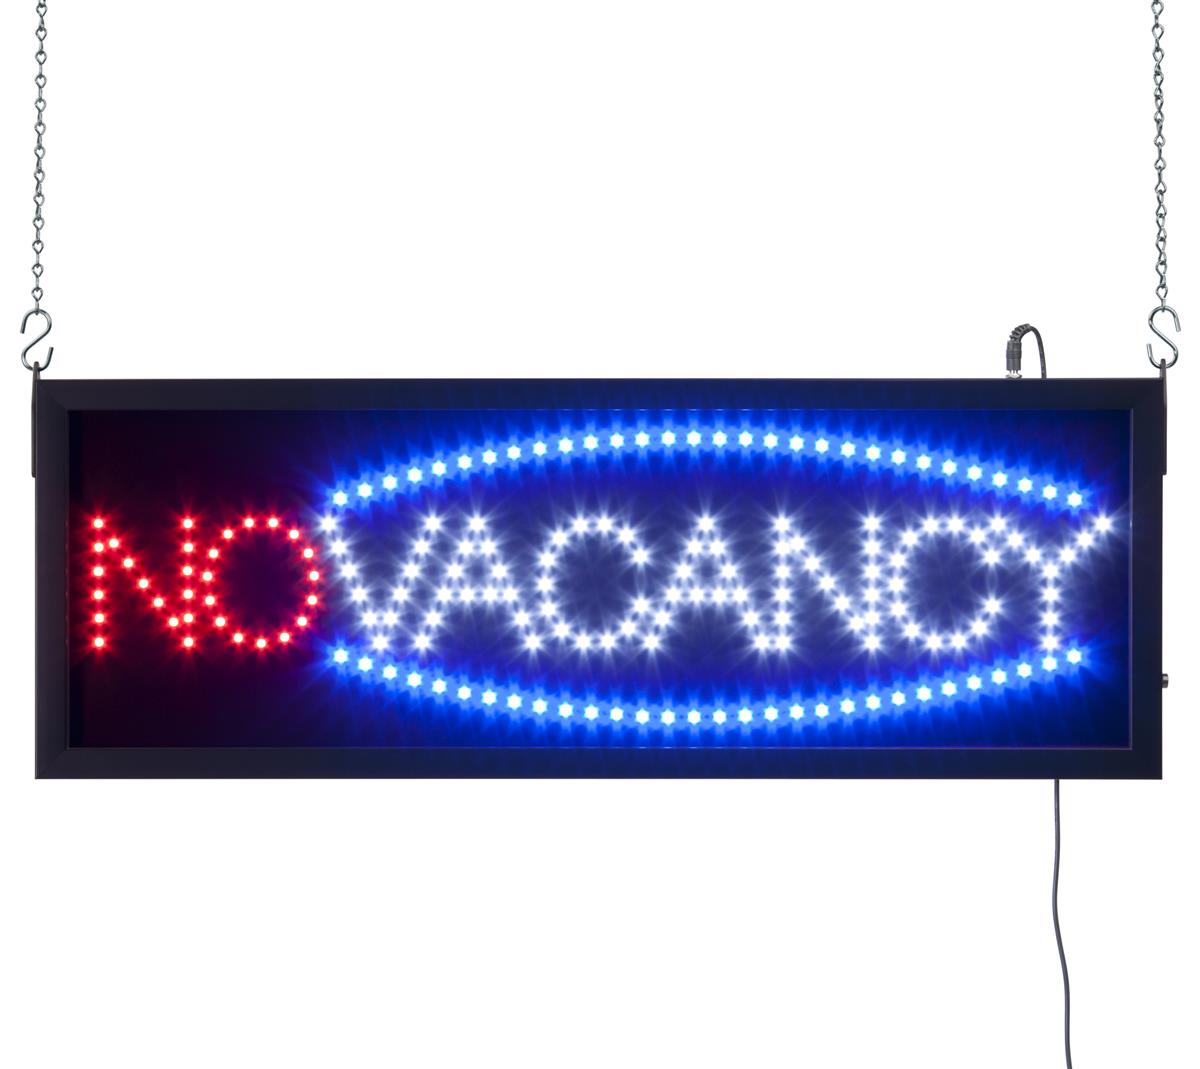 Window Sign 8 x 3 Inches Vacancy And No Vacancy Window Sign On Chain 